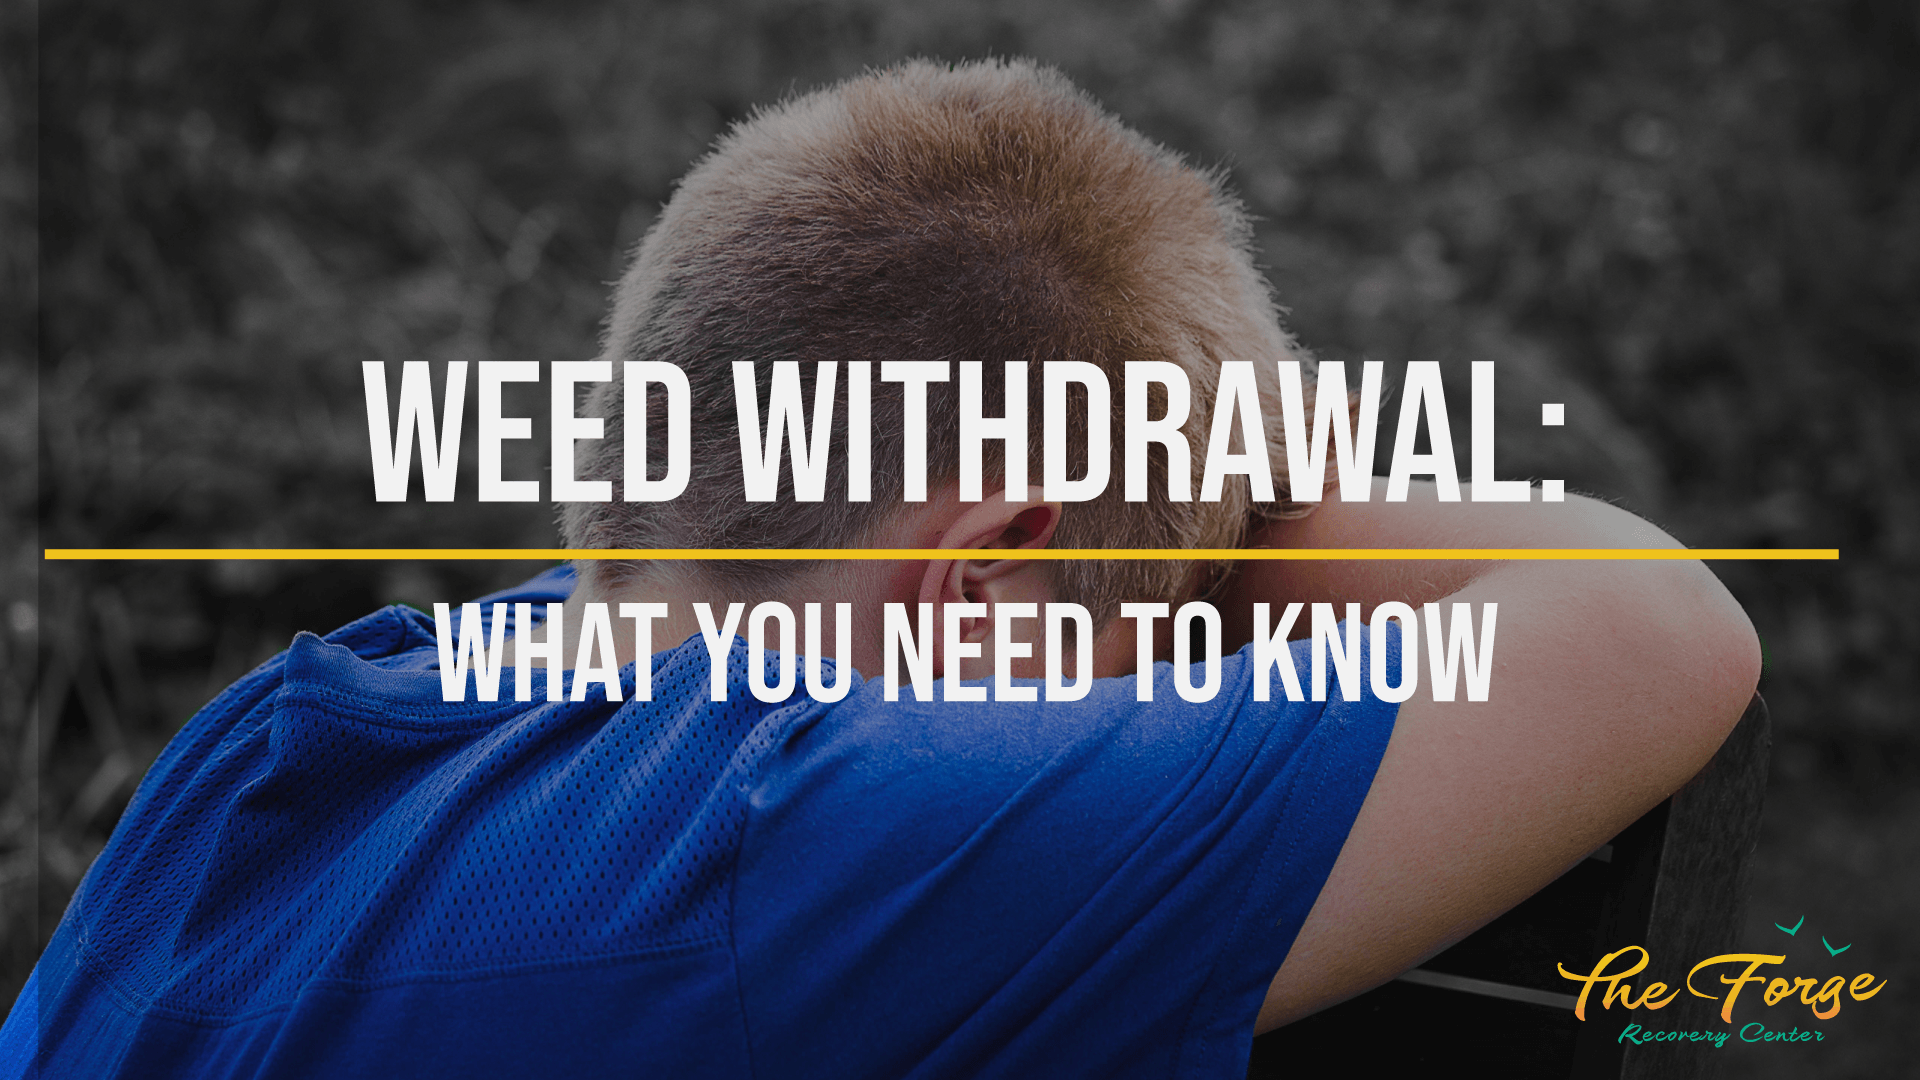 What are Weed Withdrawal Symptoms?